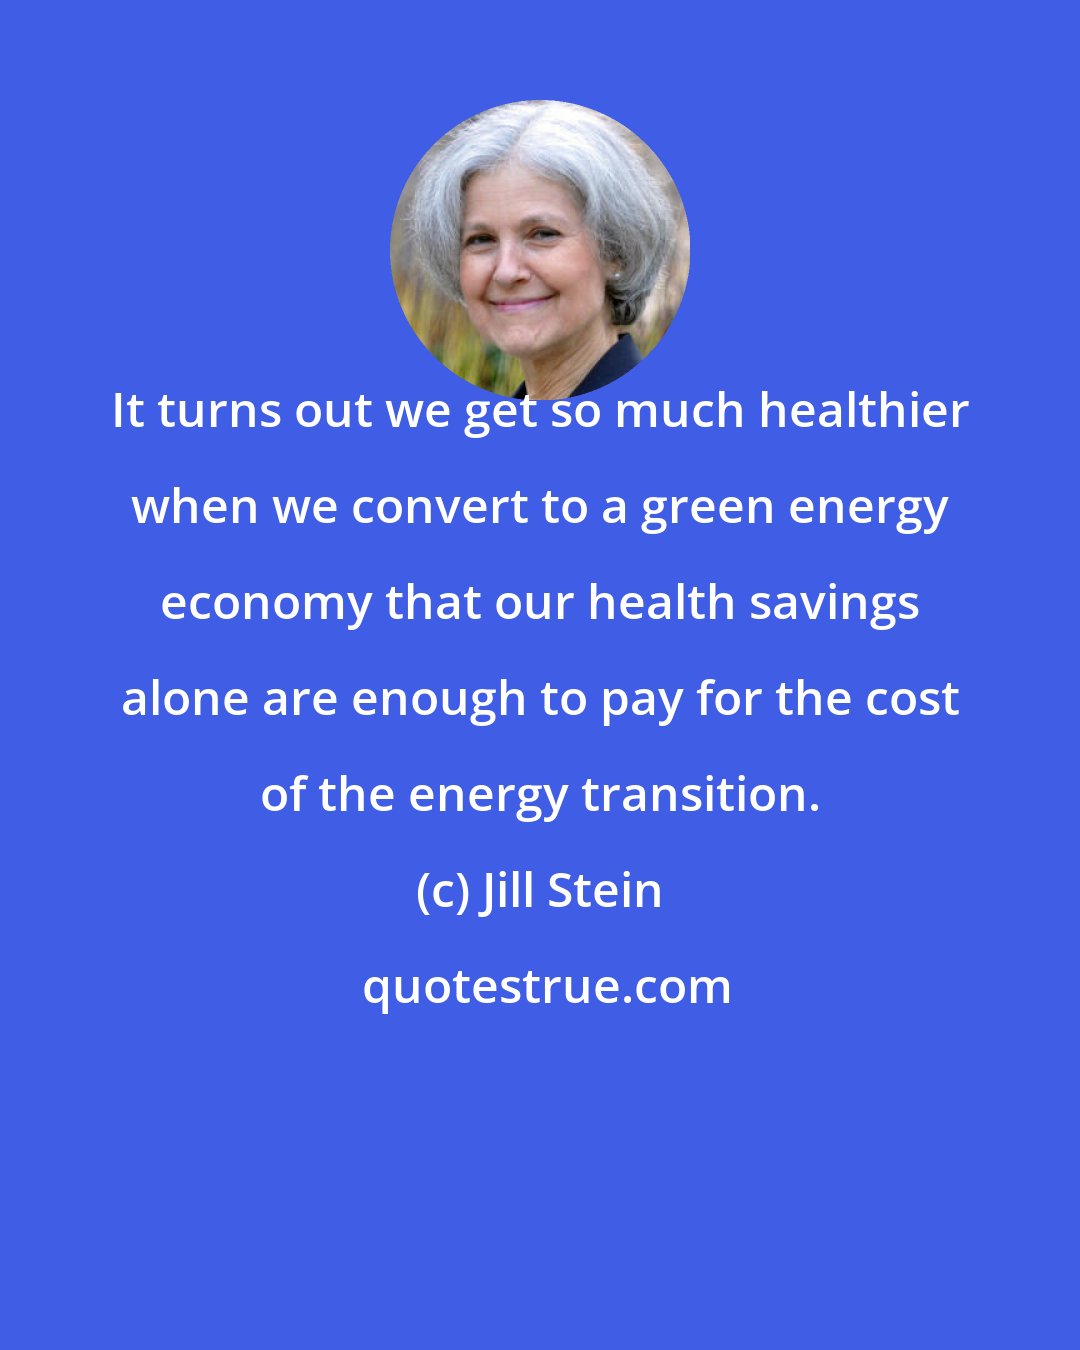 Jill Stein: It turns out we get so much healthier when we convert to a green energy economy that our health savings alone are enough to pay for the cost of the energy transition.